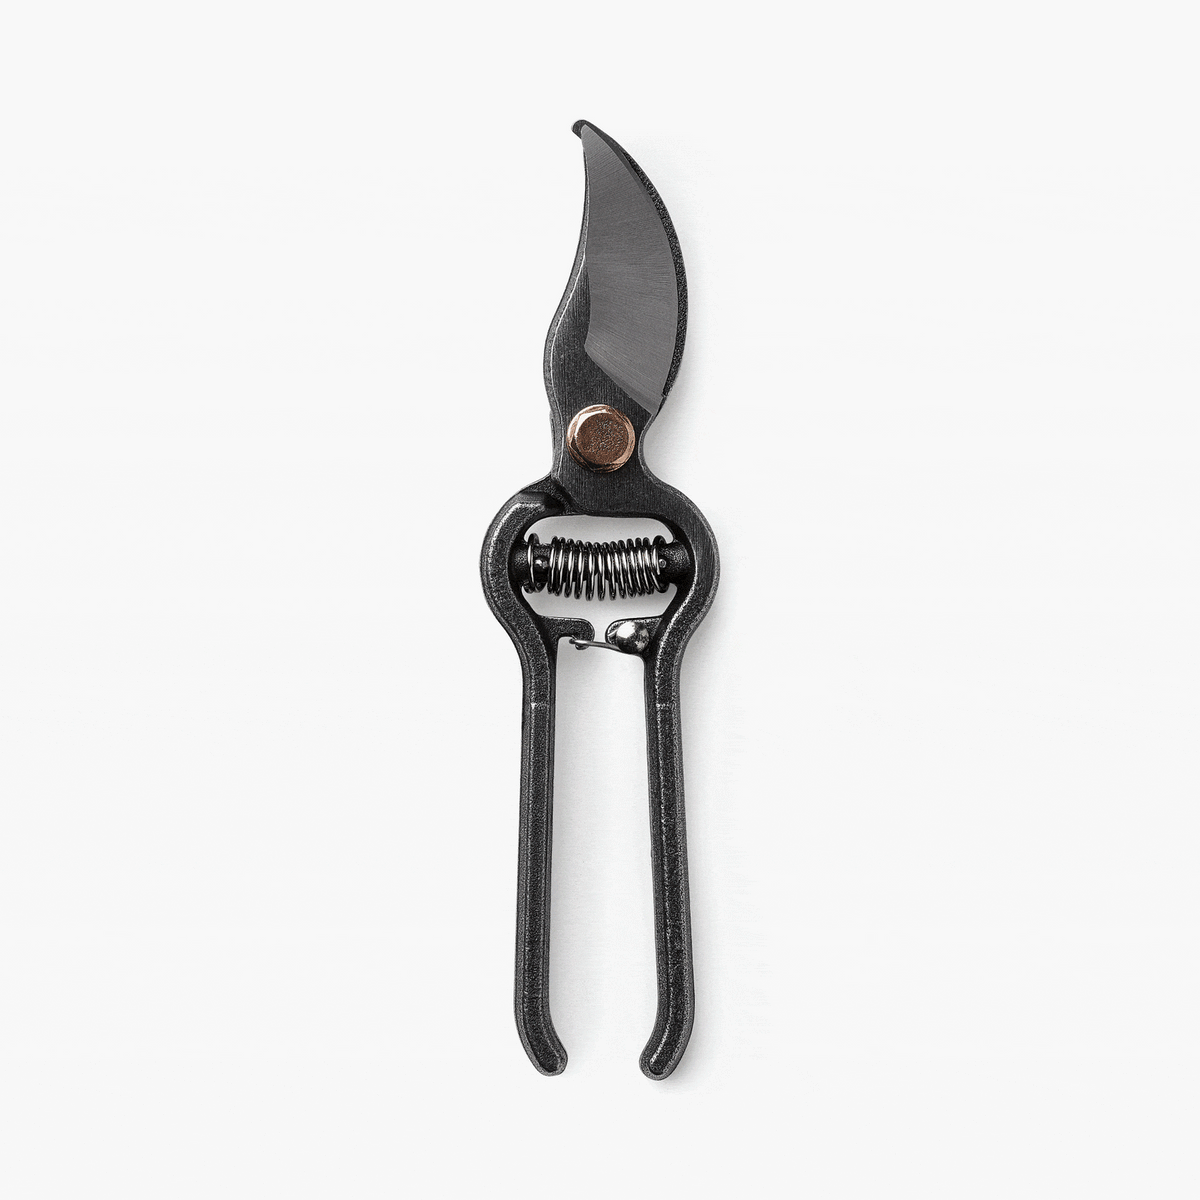 A durable pair of Barebones Pruner with sheath on a white background.